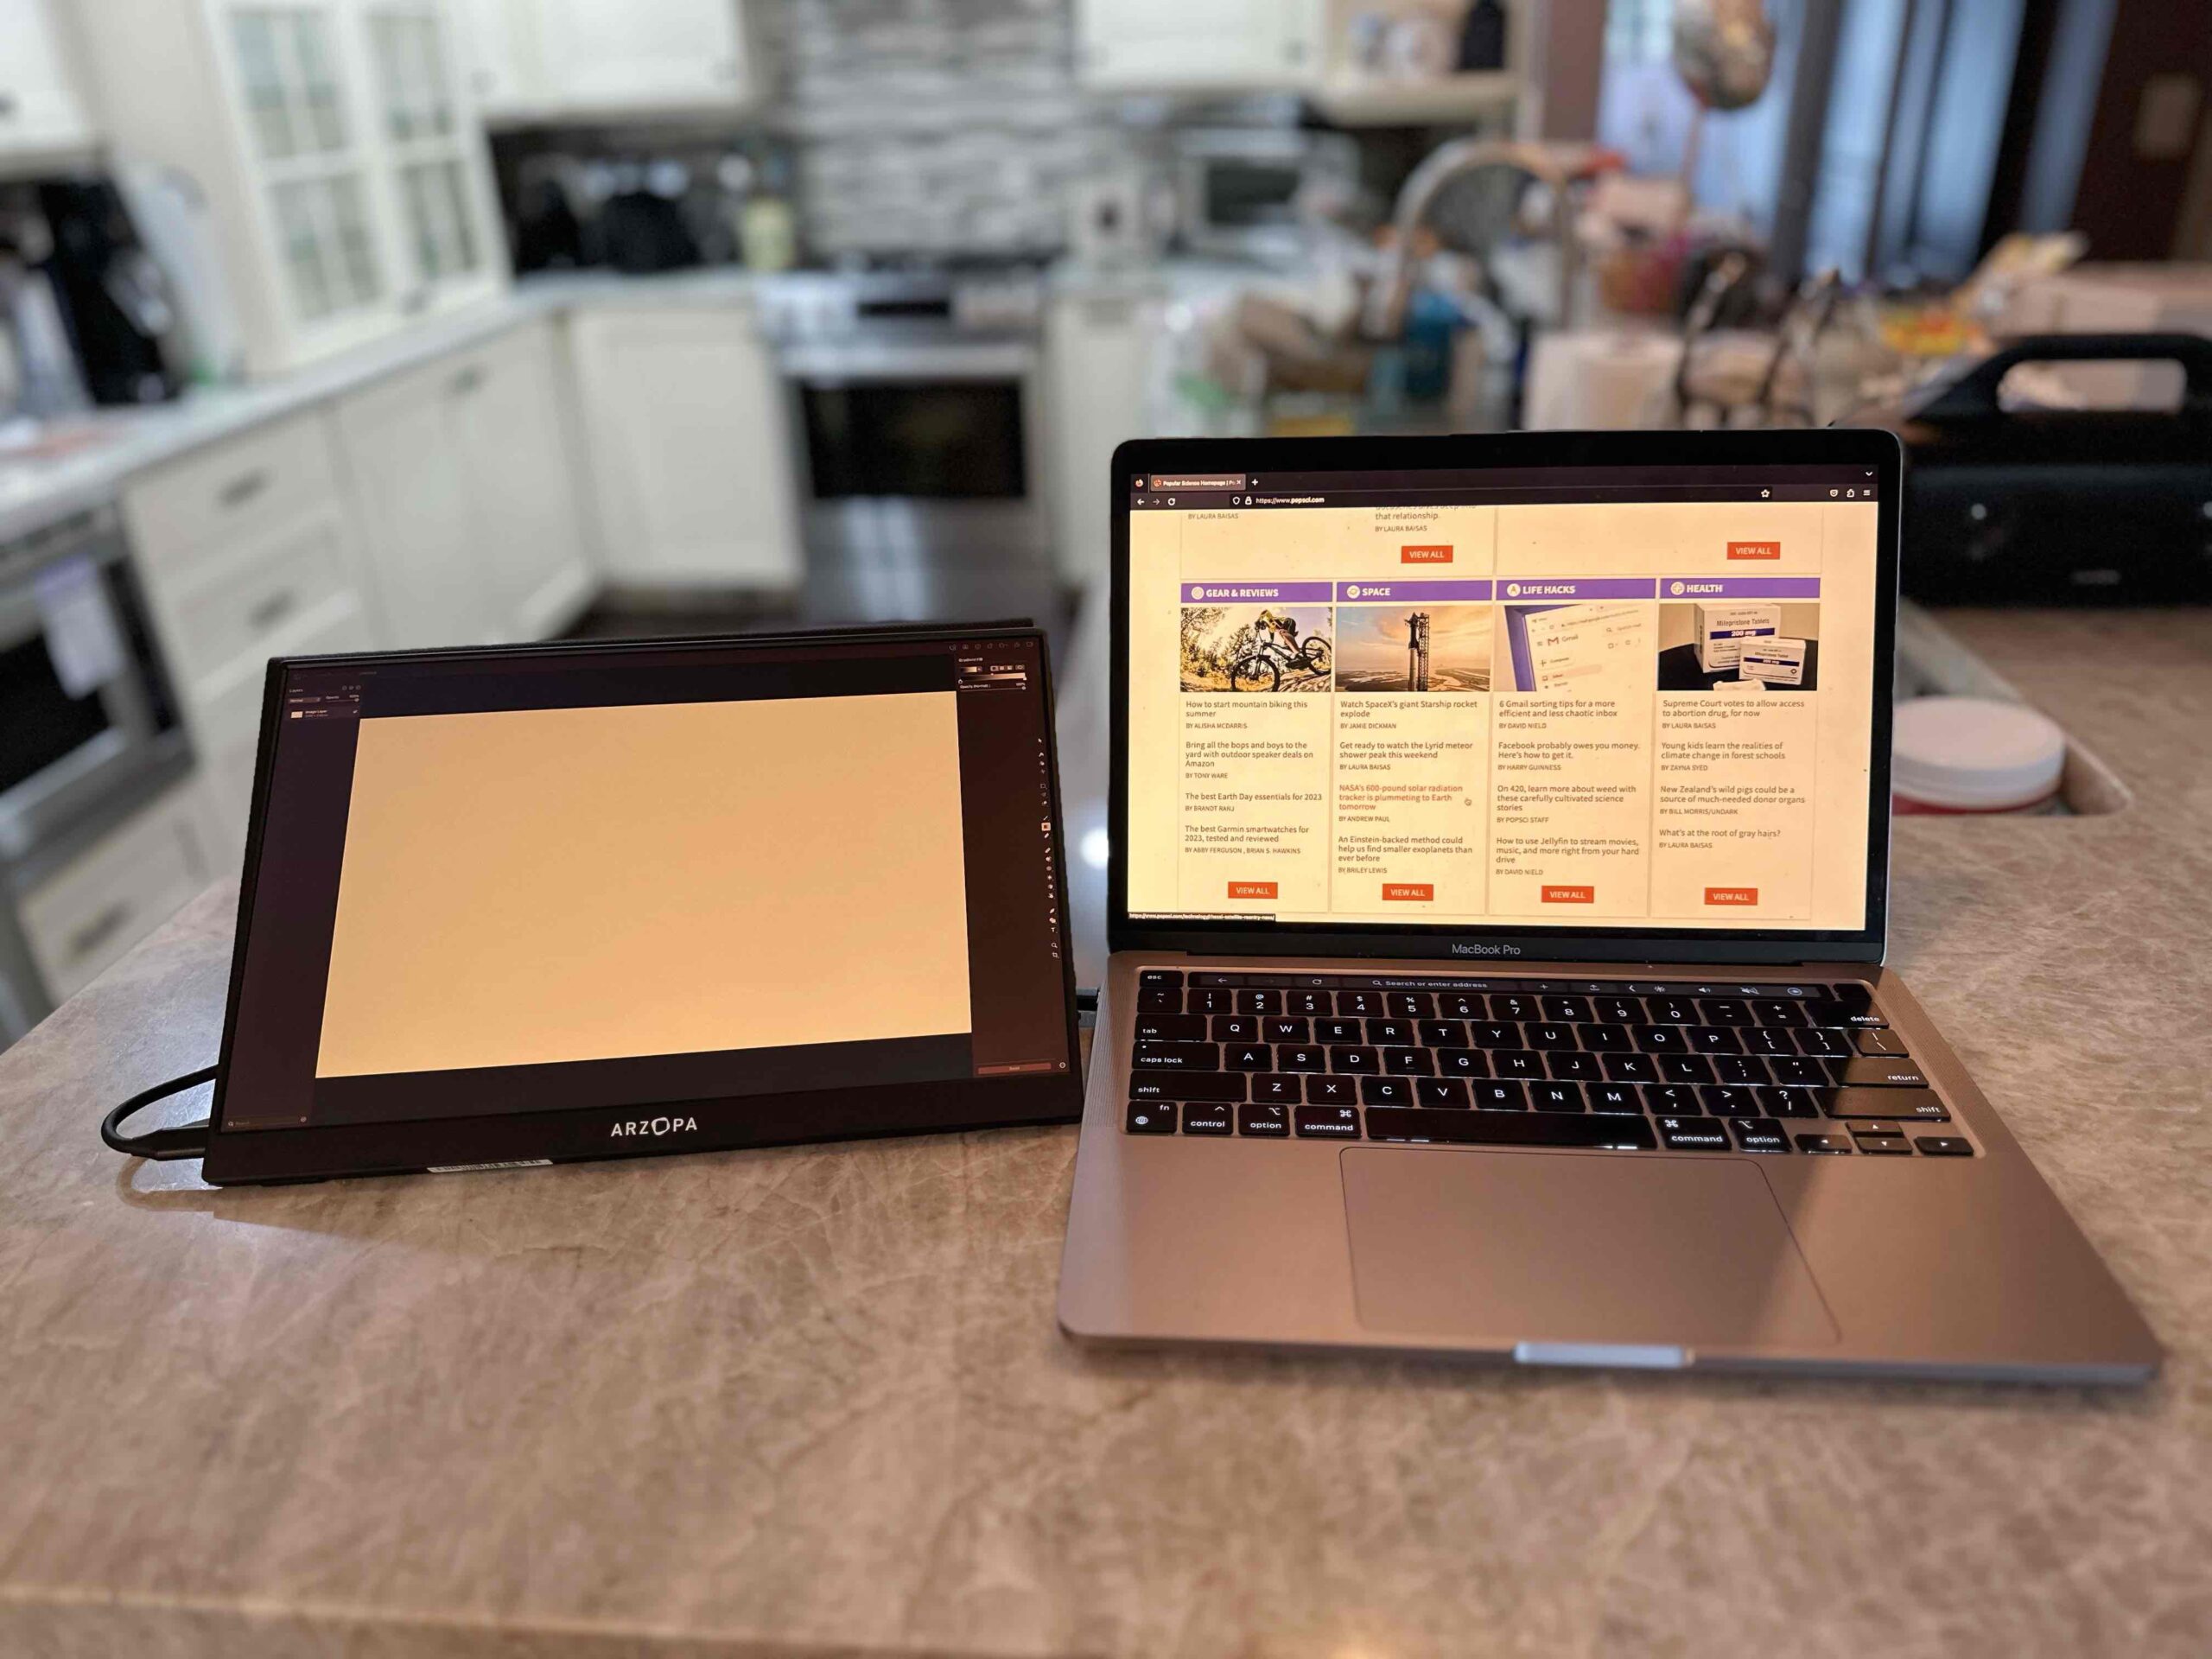 Arzopa Portable Monitor Review: Why Everyone Needs This Extra Screen – SPY